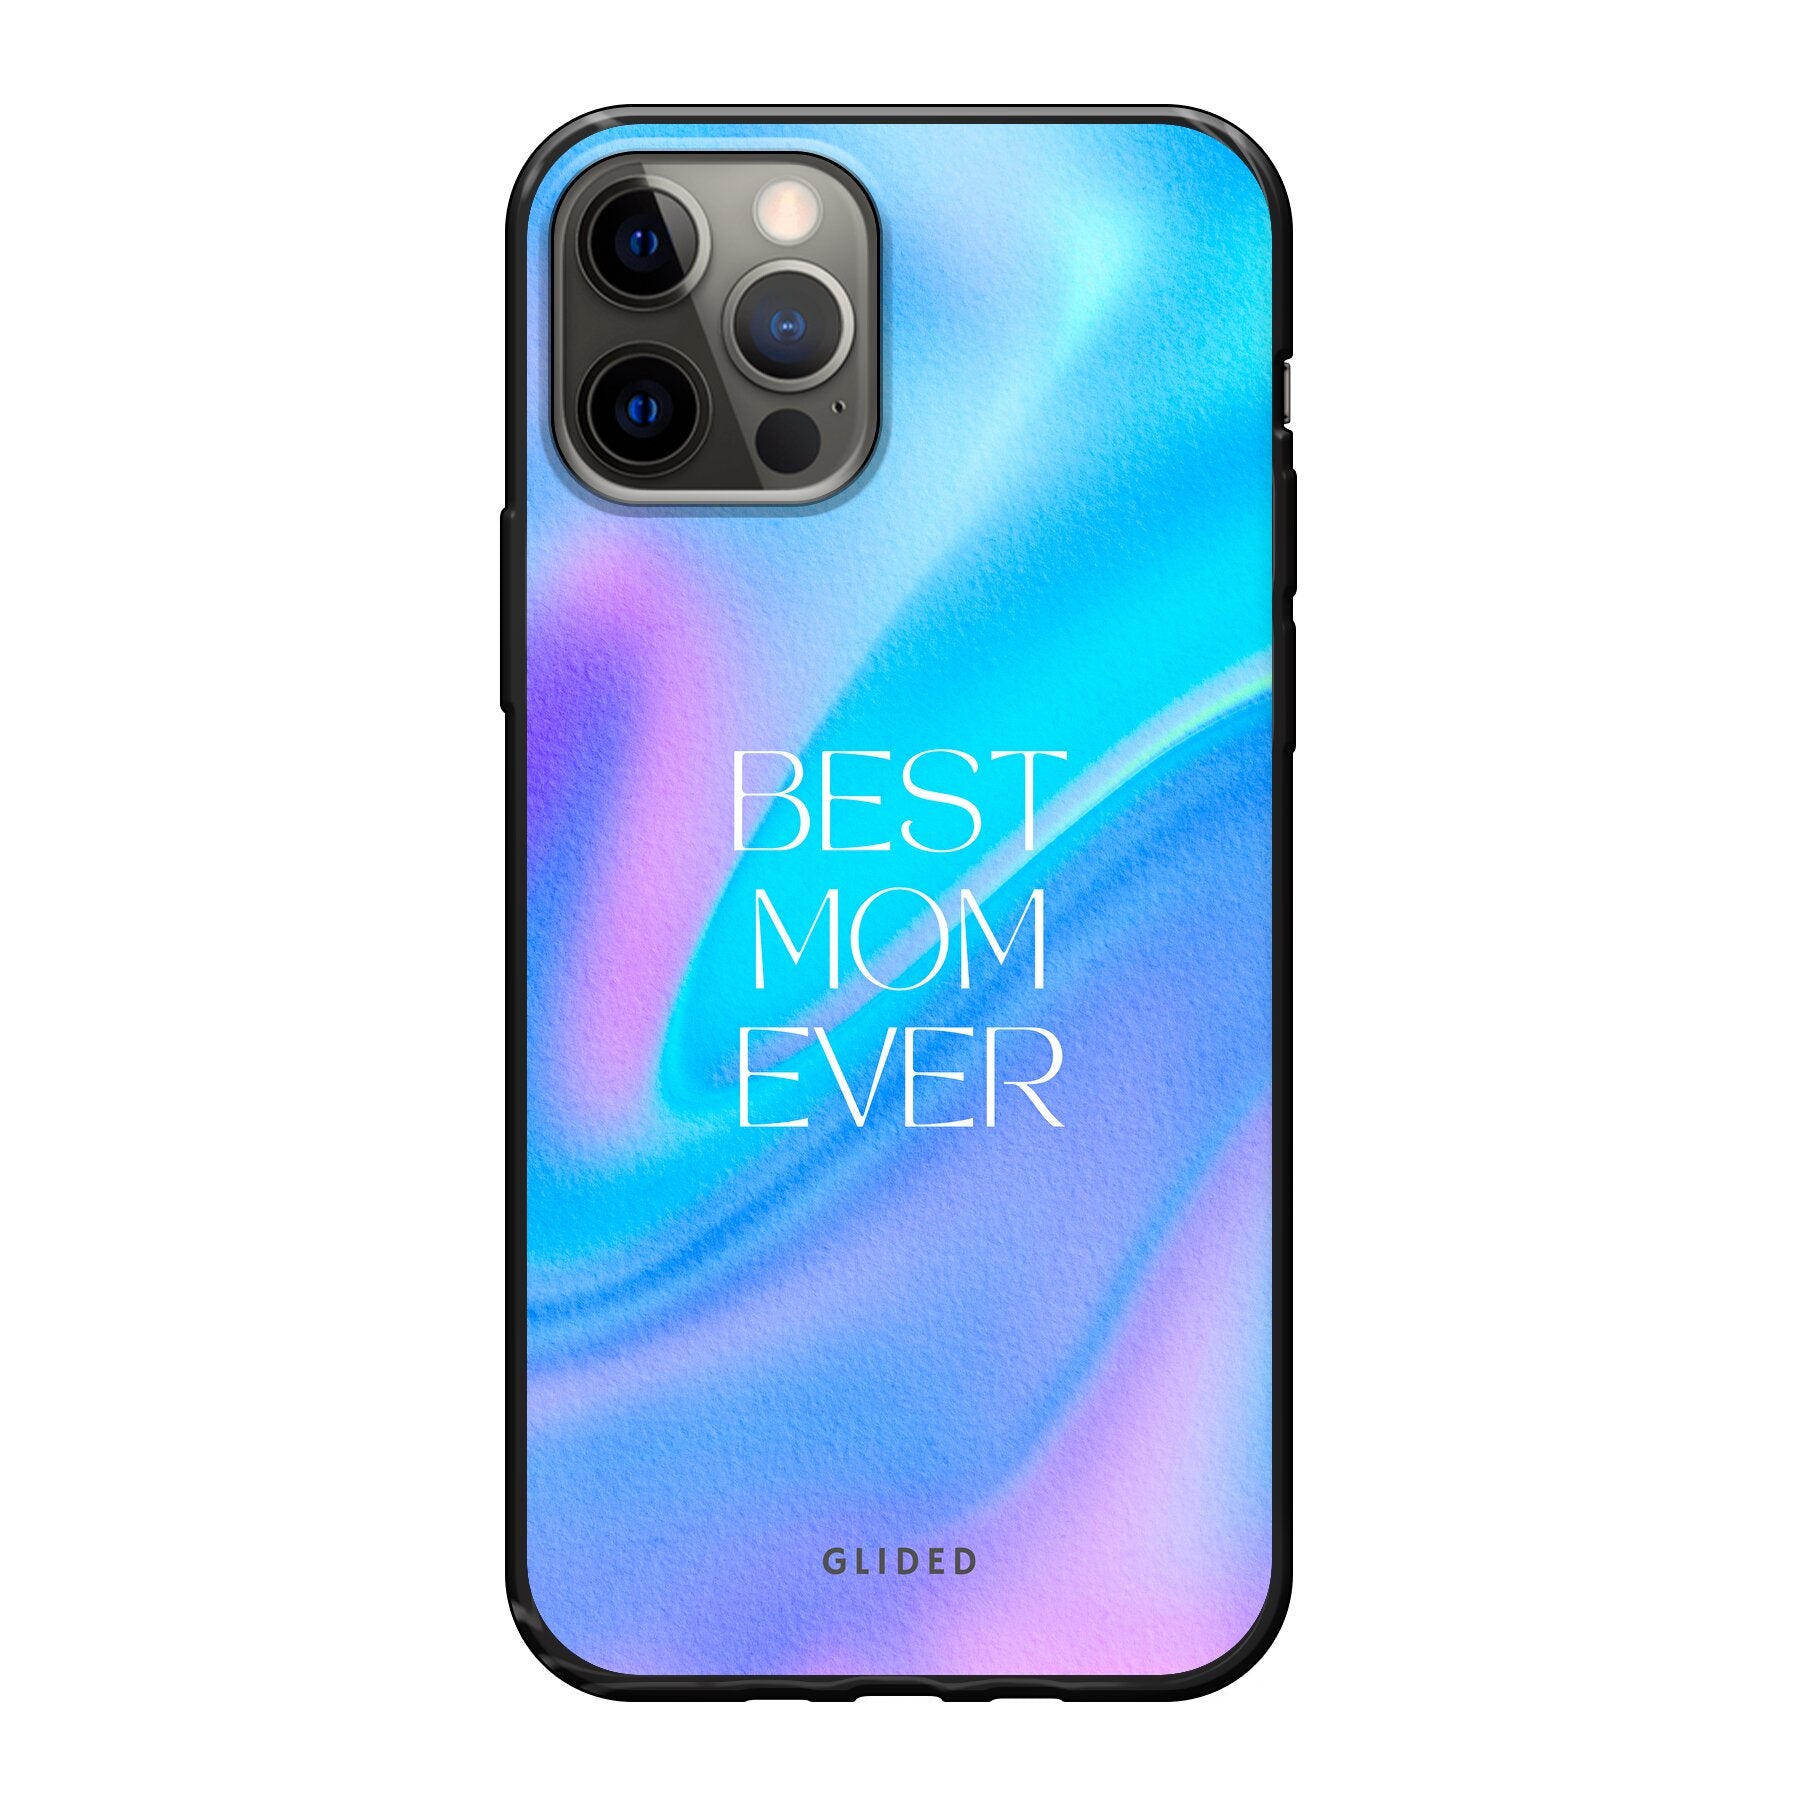 Best Mom - iPhone 12 Pro - Soft case